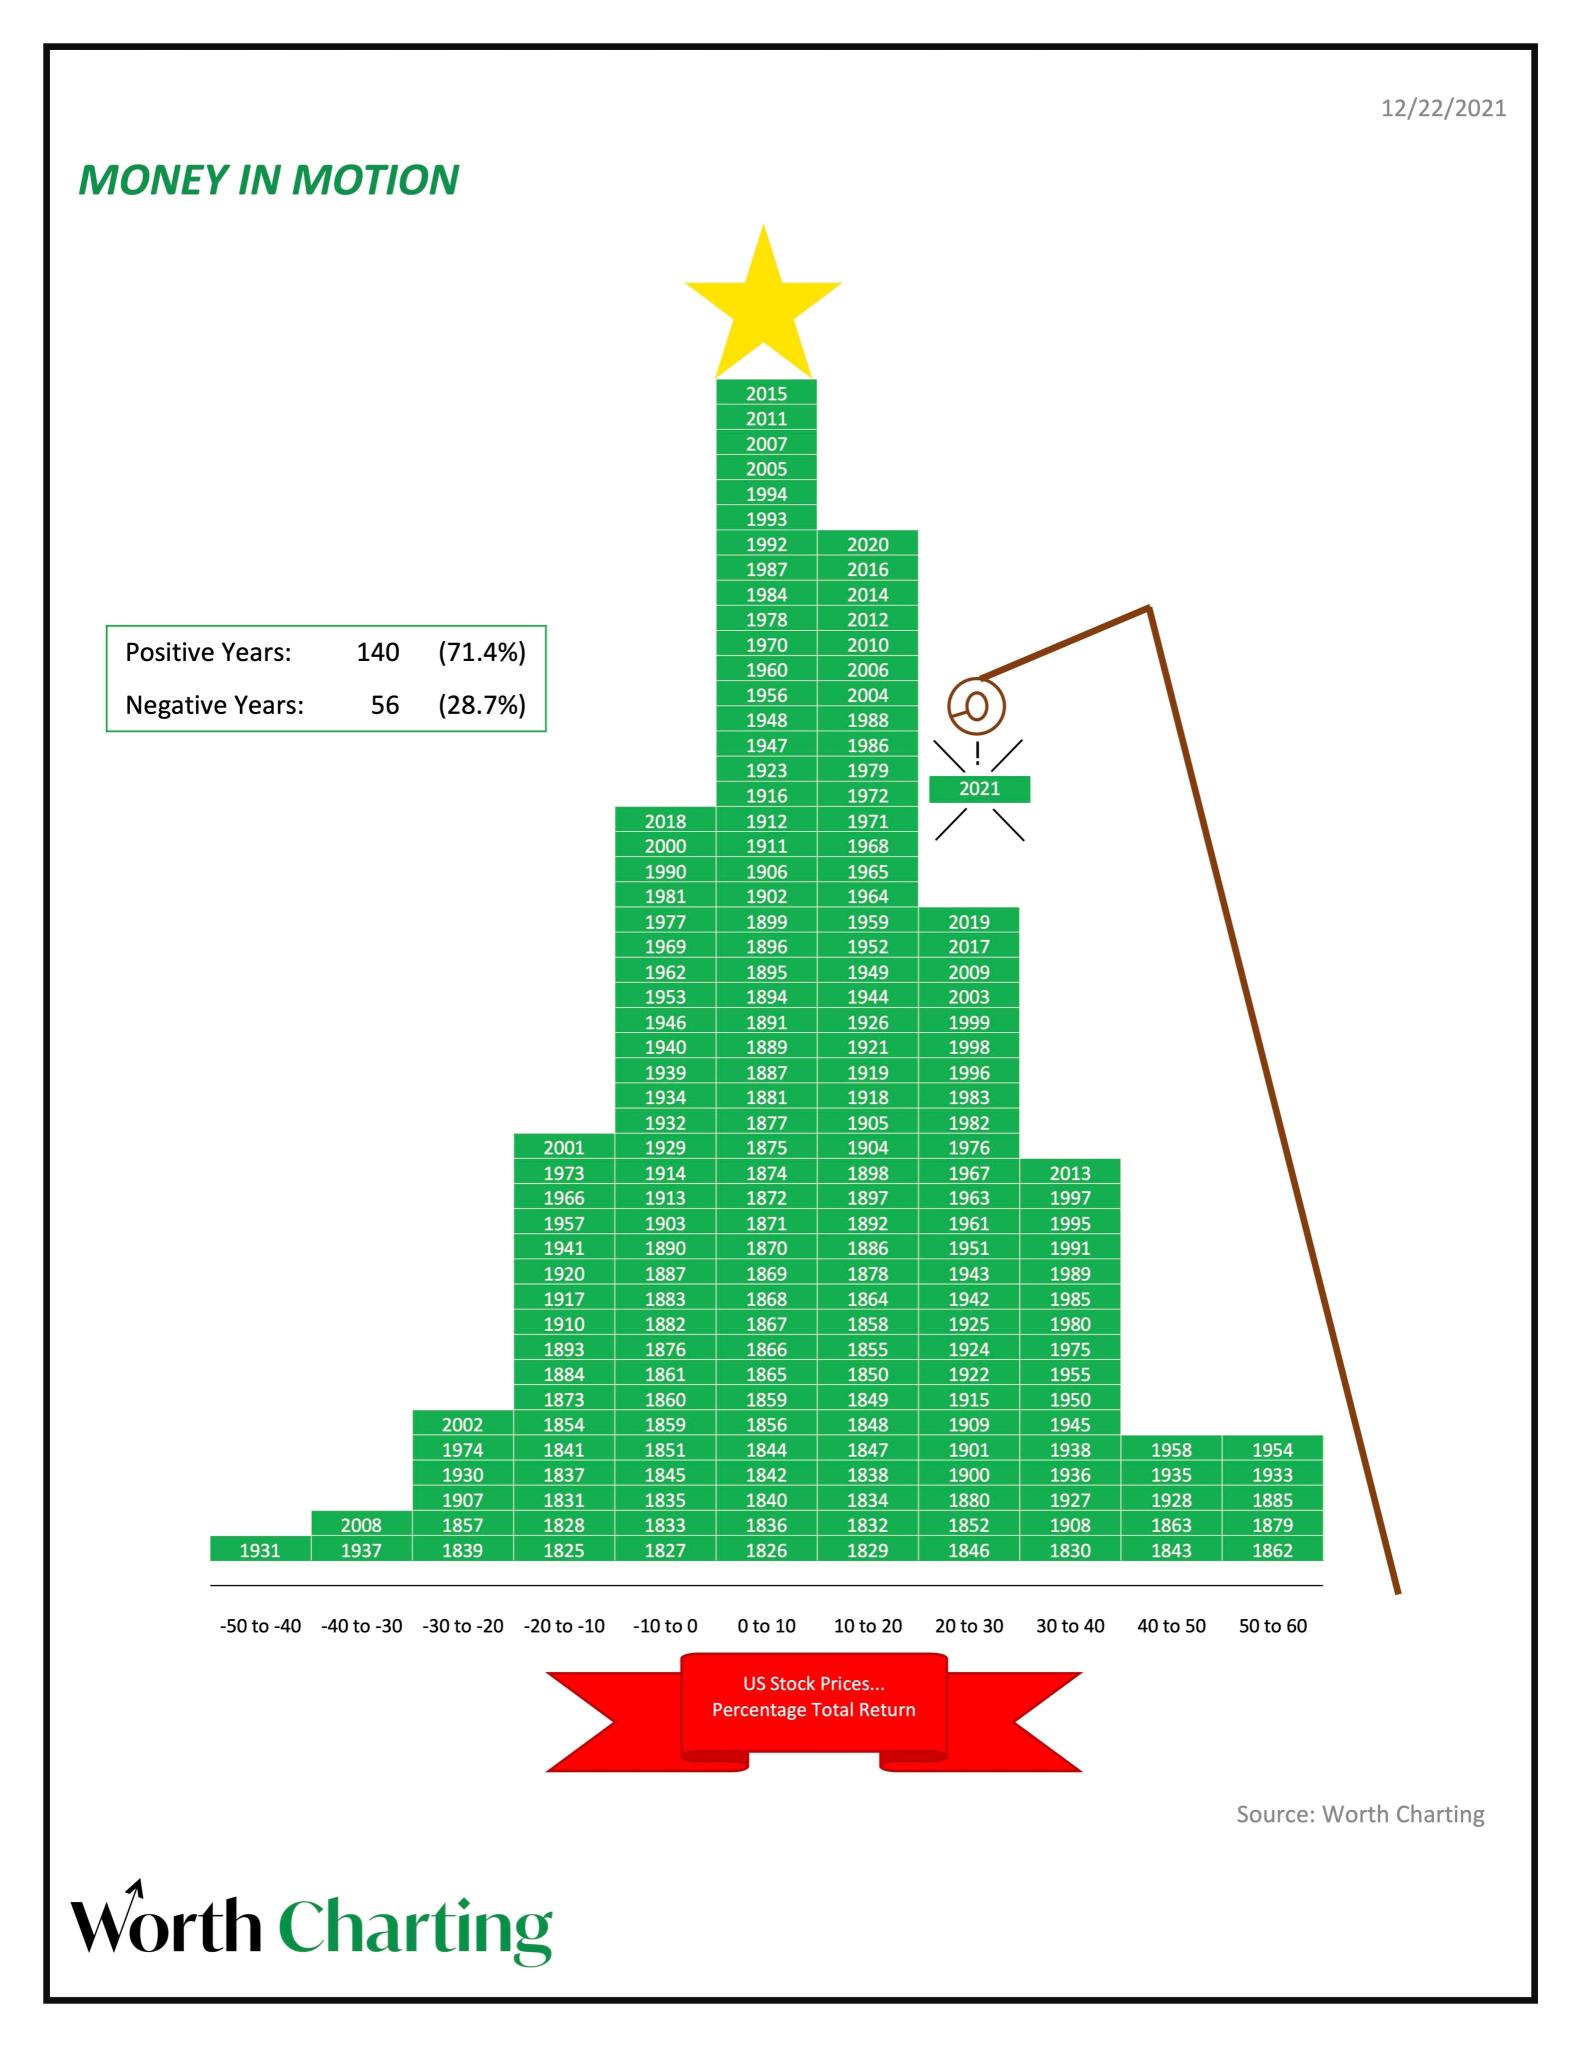 The &quot;Christmas Tree&quot; stacking chart of historical annual returns for the S&amp;P 500